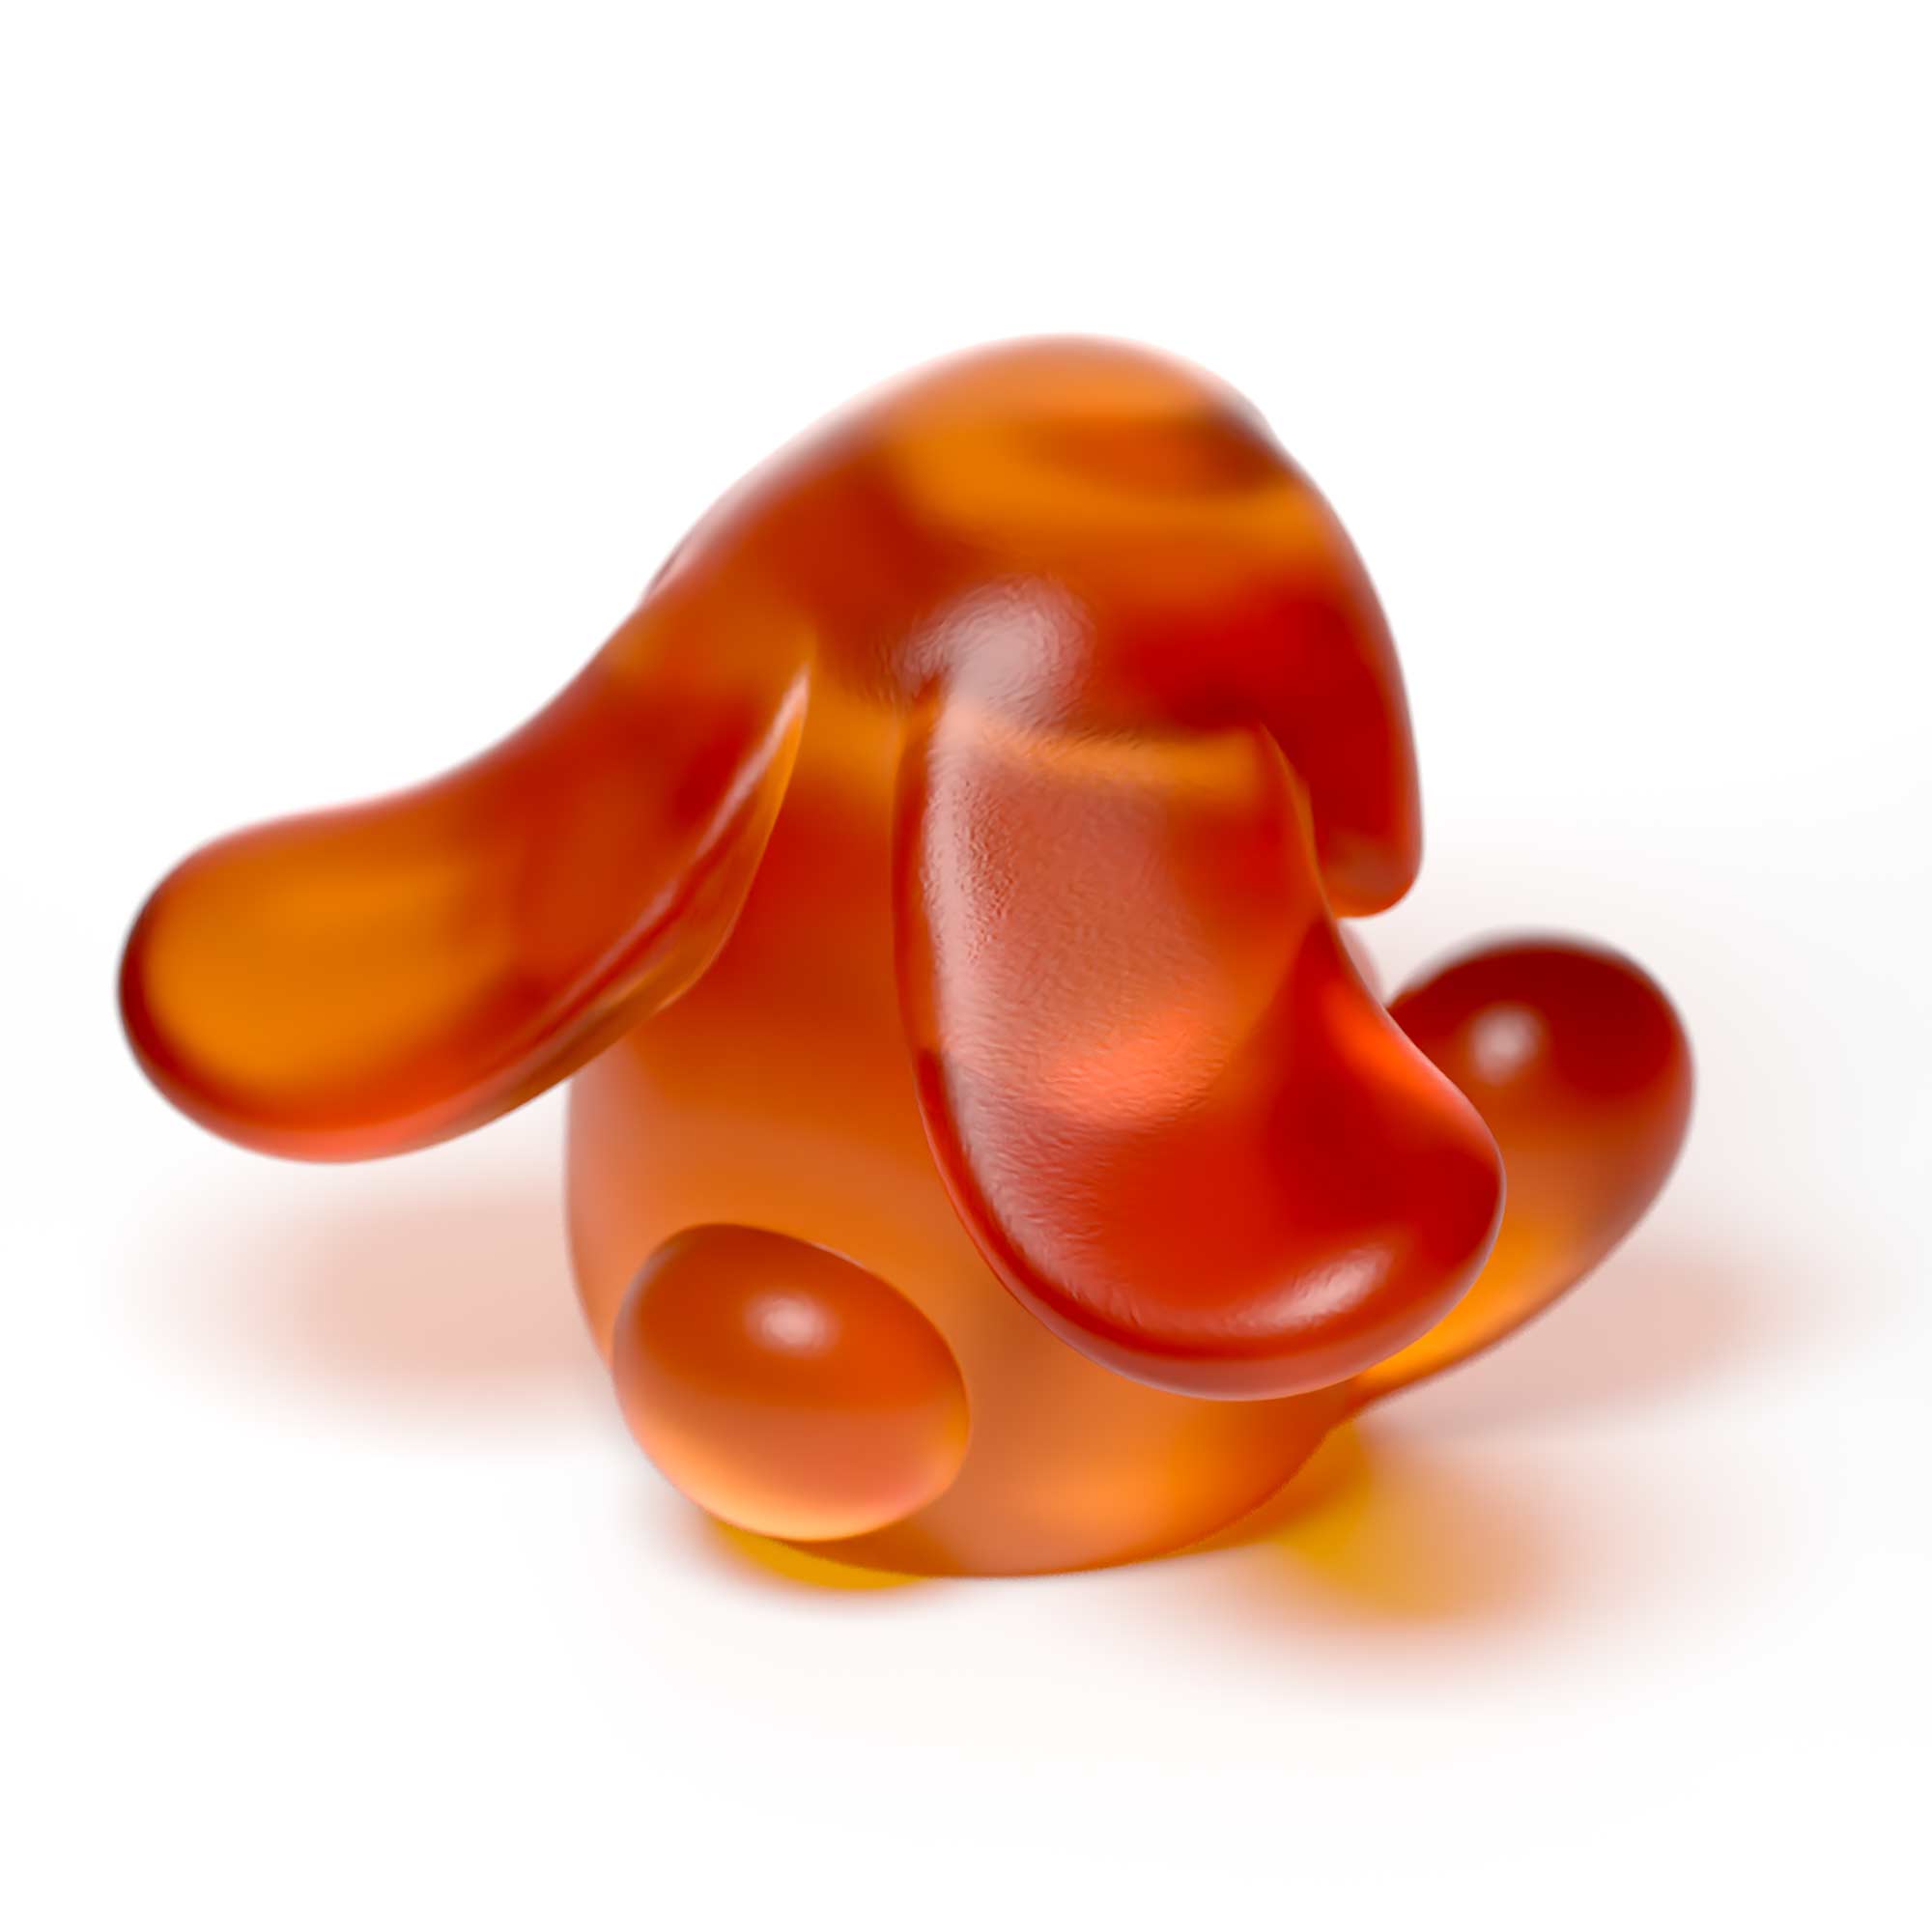 "Bunnie Roar Crystal," a sculpture, amber color, is an artistic creation by Ferdi B Dick 02 back view of tail 